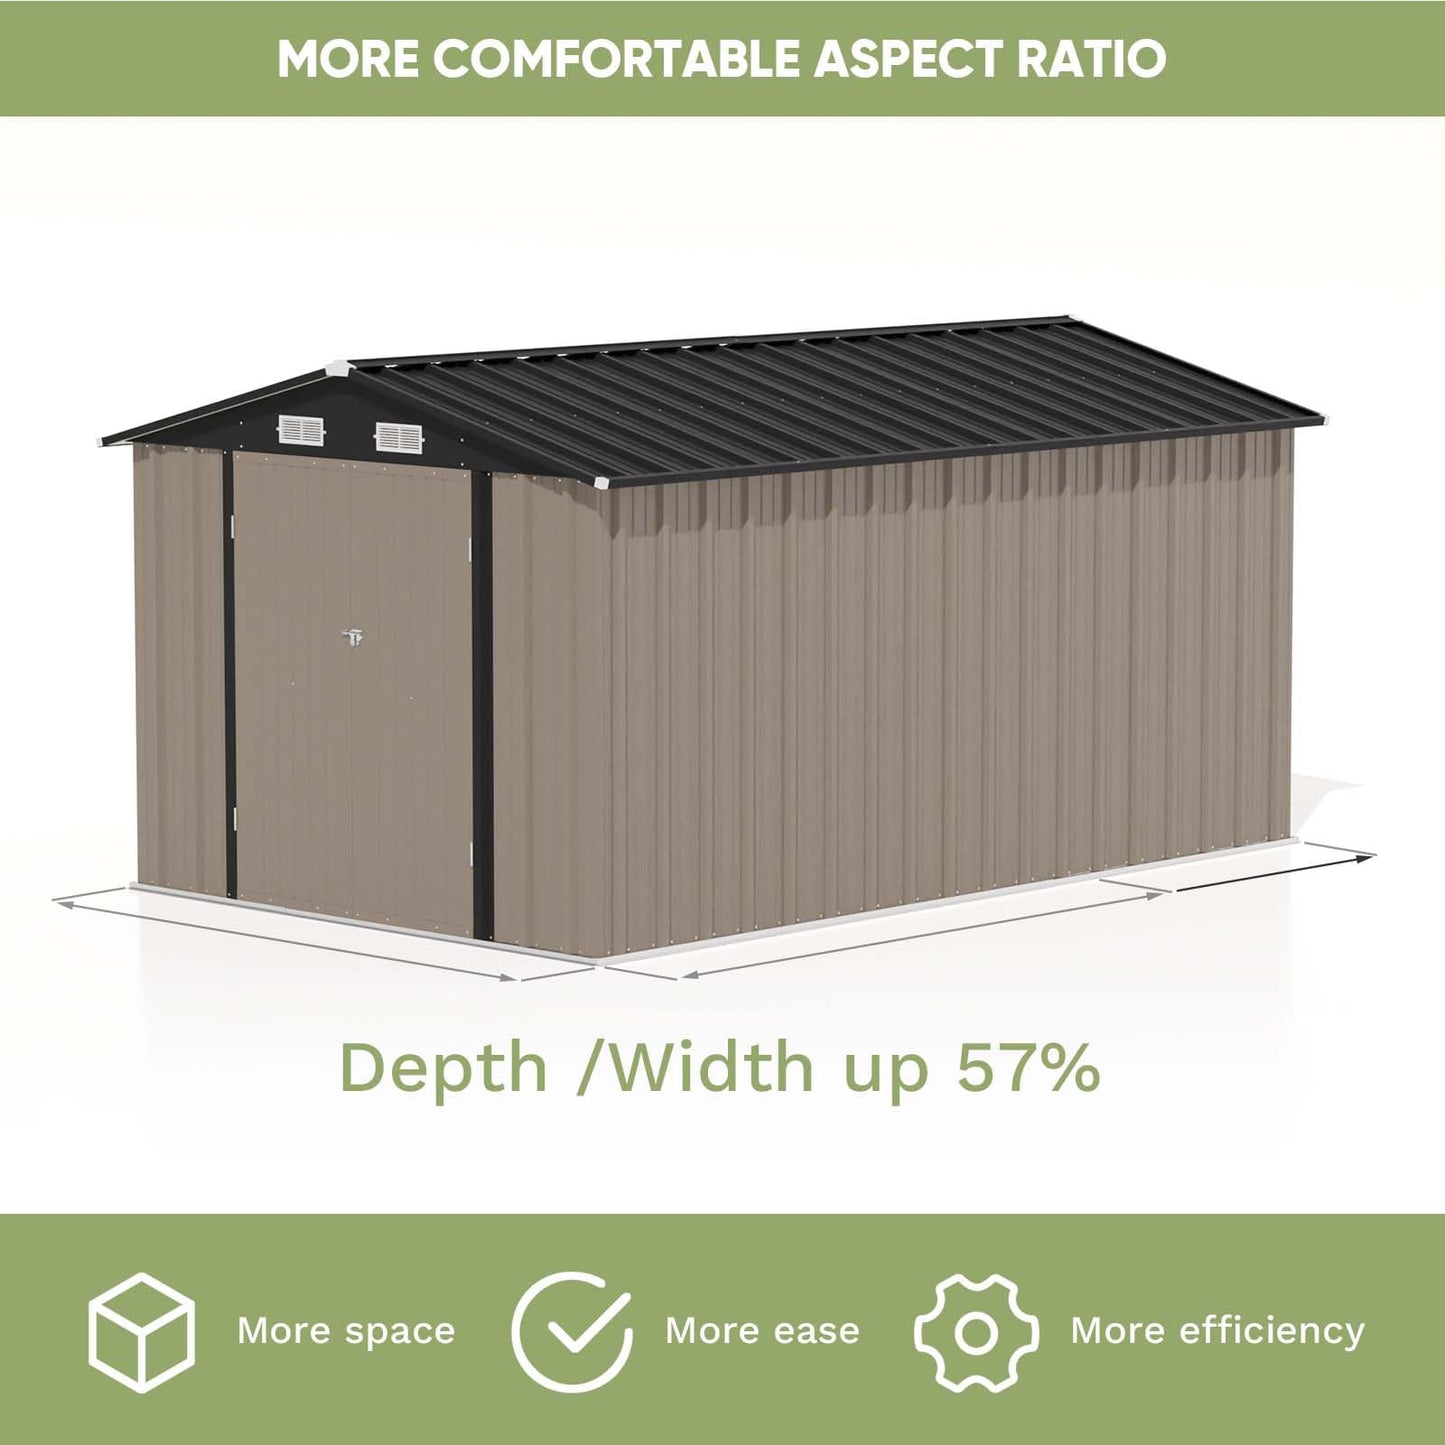 Patiowell 8' x 12' Metal Storage Shed for Outdoor, Steel Yard Shed with Design of Lockable Doors, Utility and Tool Storage for Garden, Backyard, Patio, Outside Use, Brown